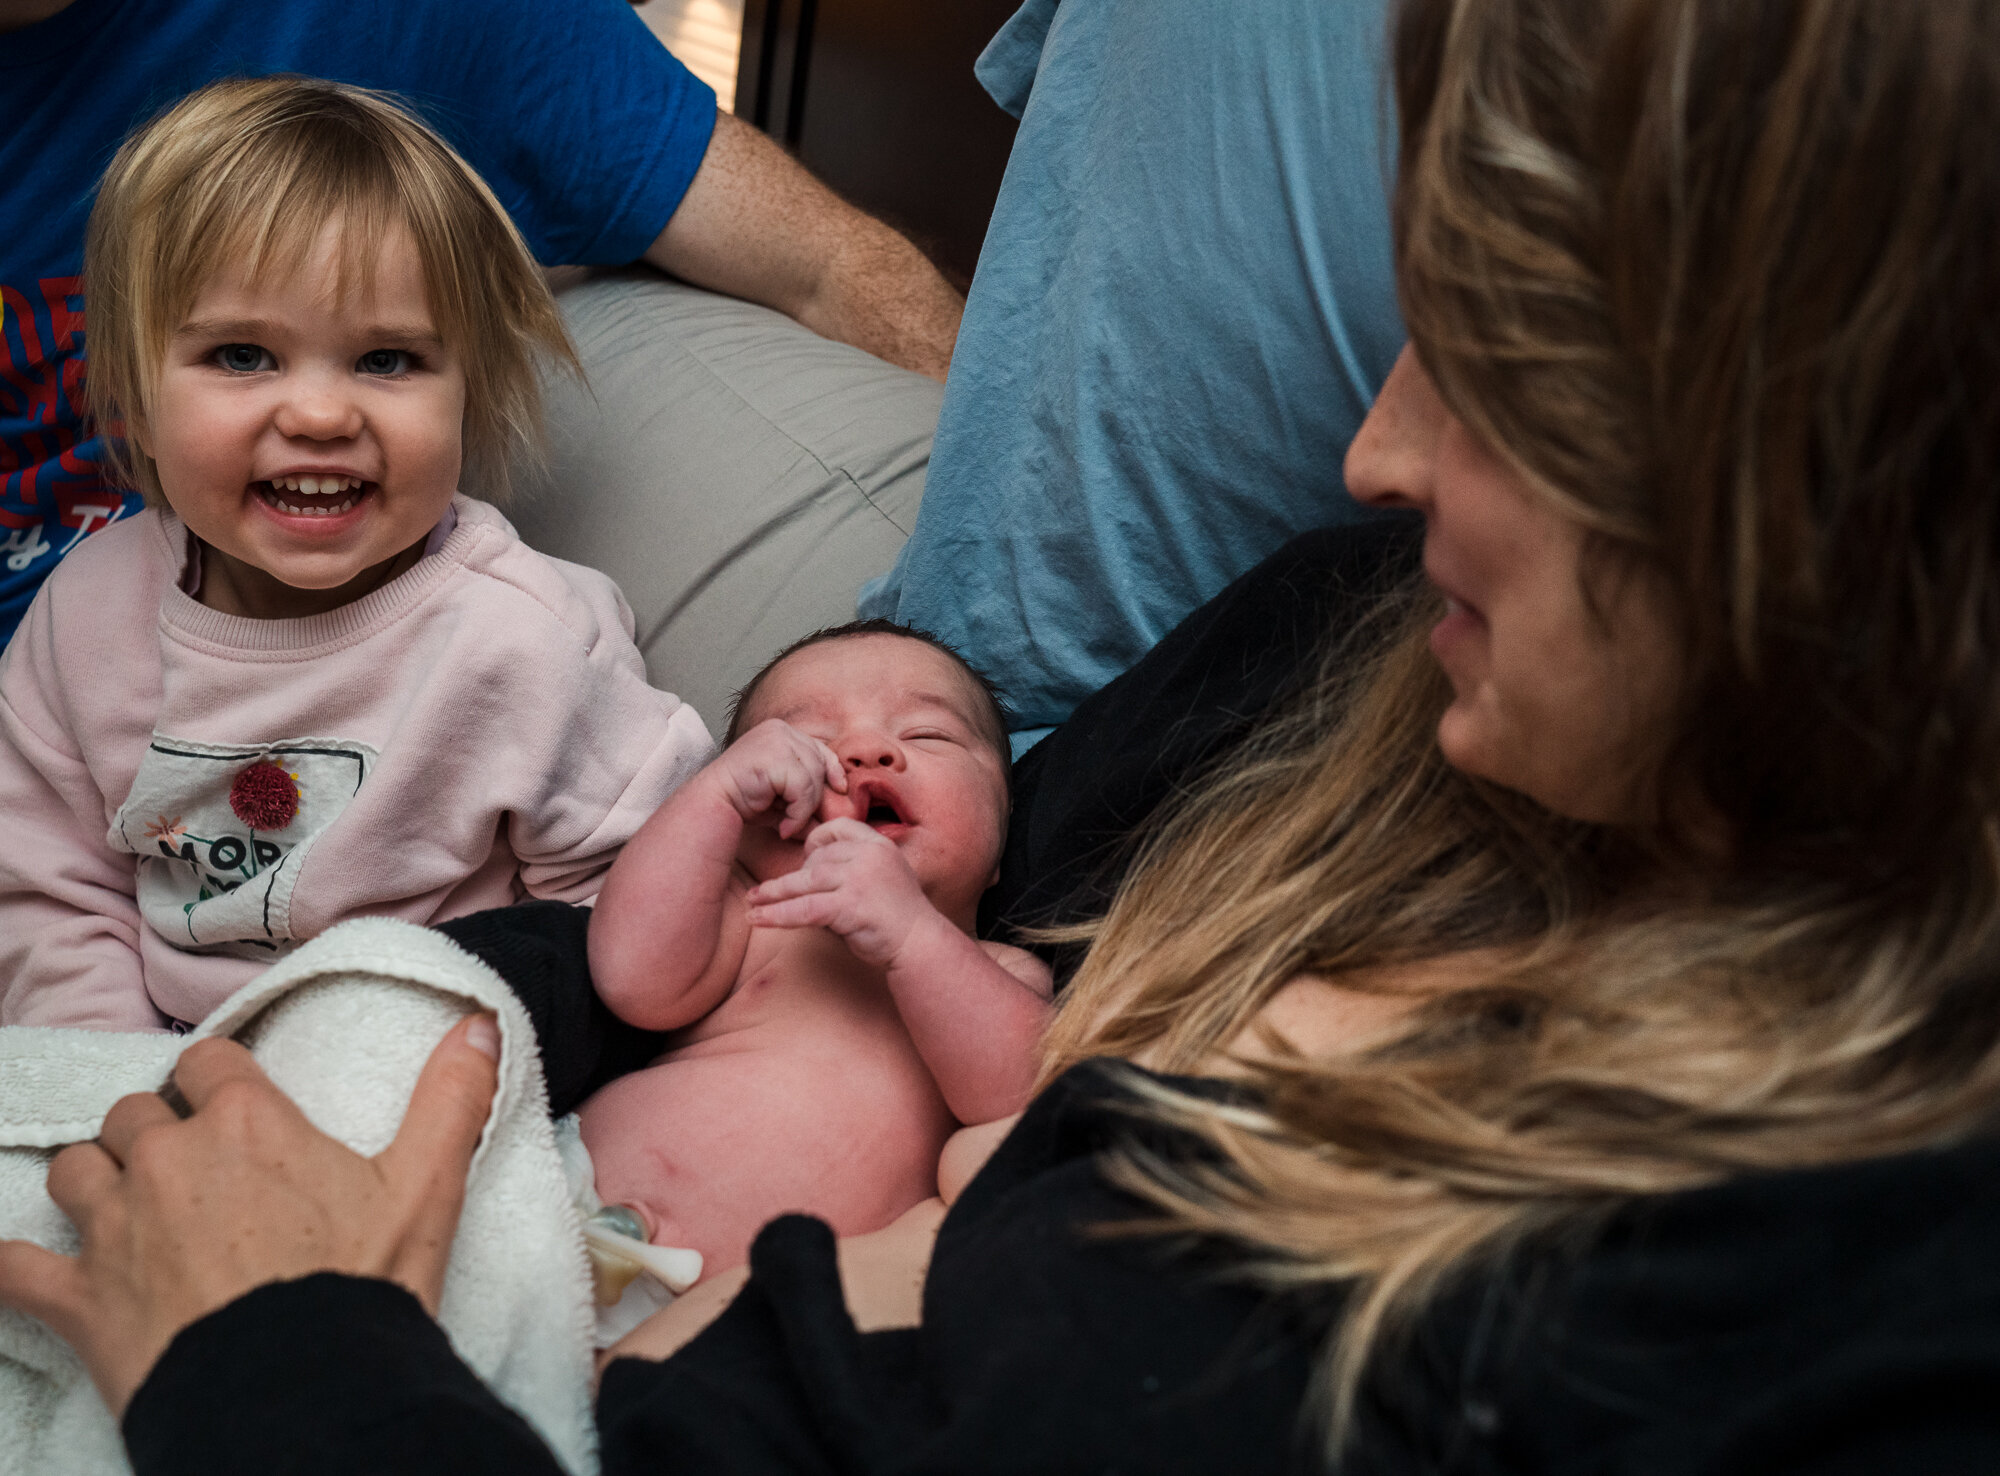 Gather Birth Cooperative- Doula Support and Birth Photography in Minneapolis - April 15, 2020 - 172503.jpg